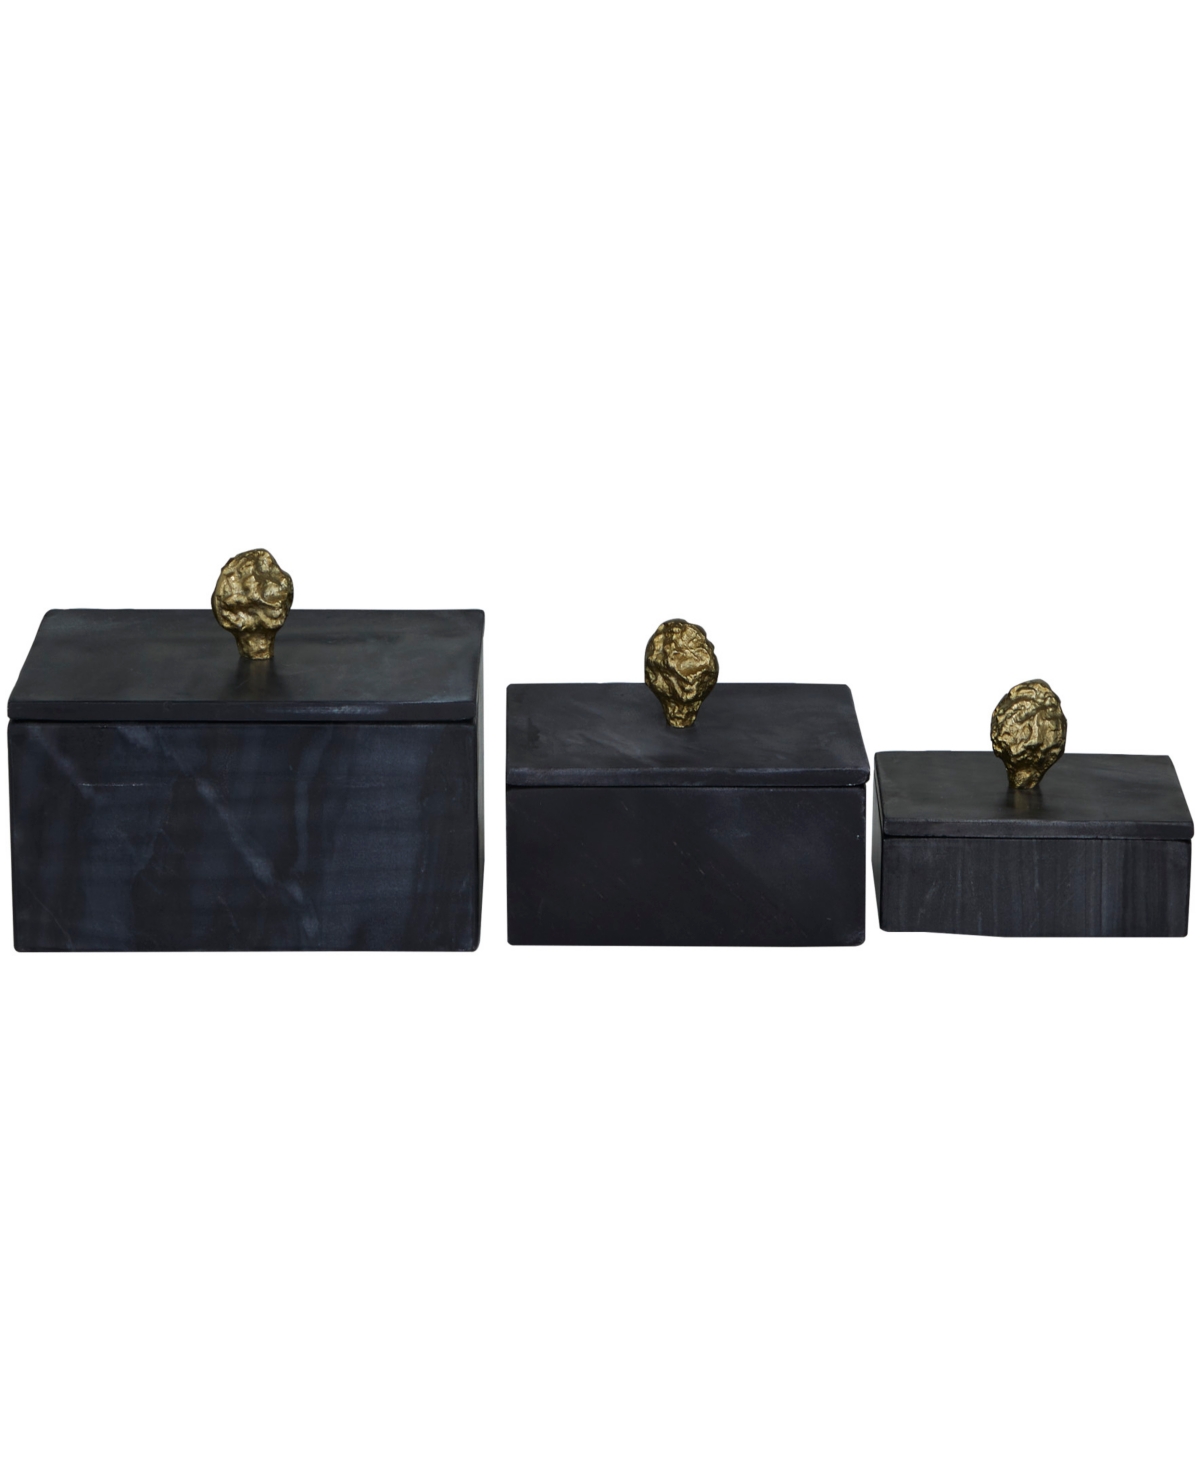 Rosemary Lane Real Marble Box With Gold-tone Finial Set Of 3 In Black